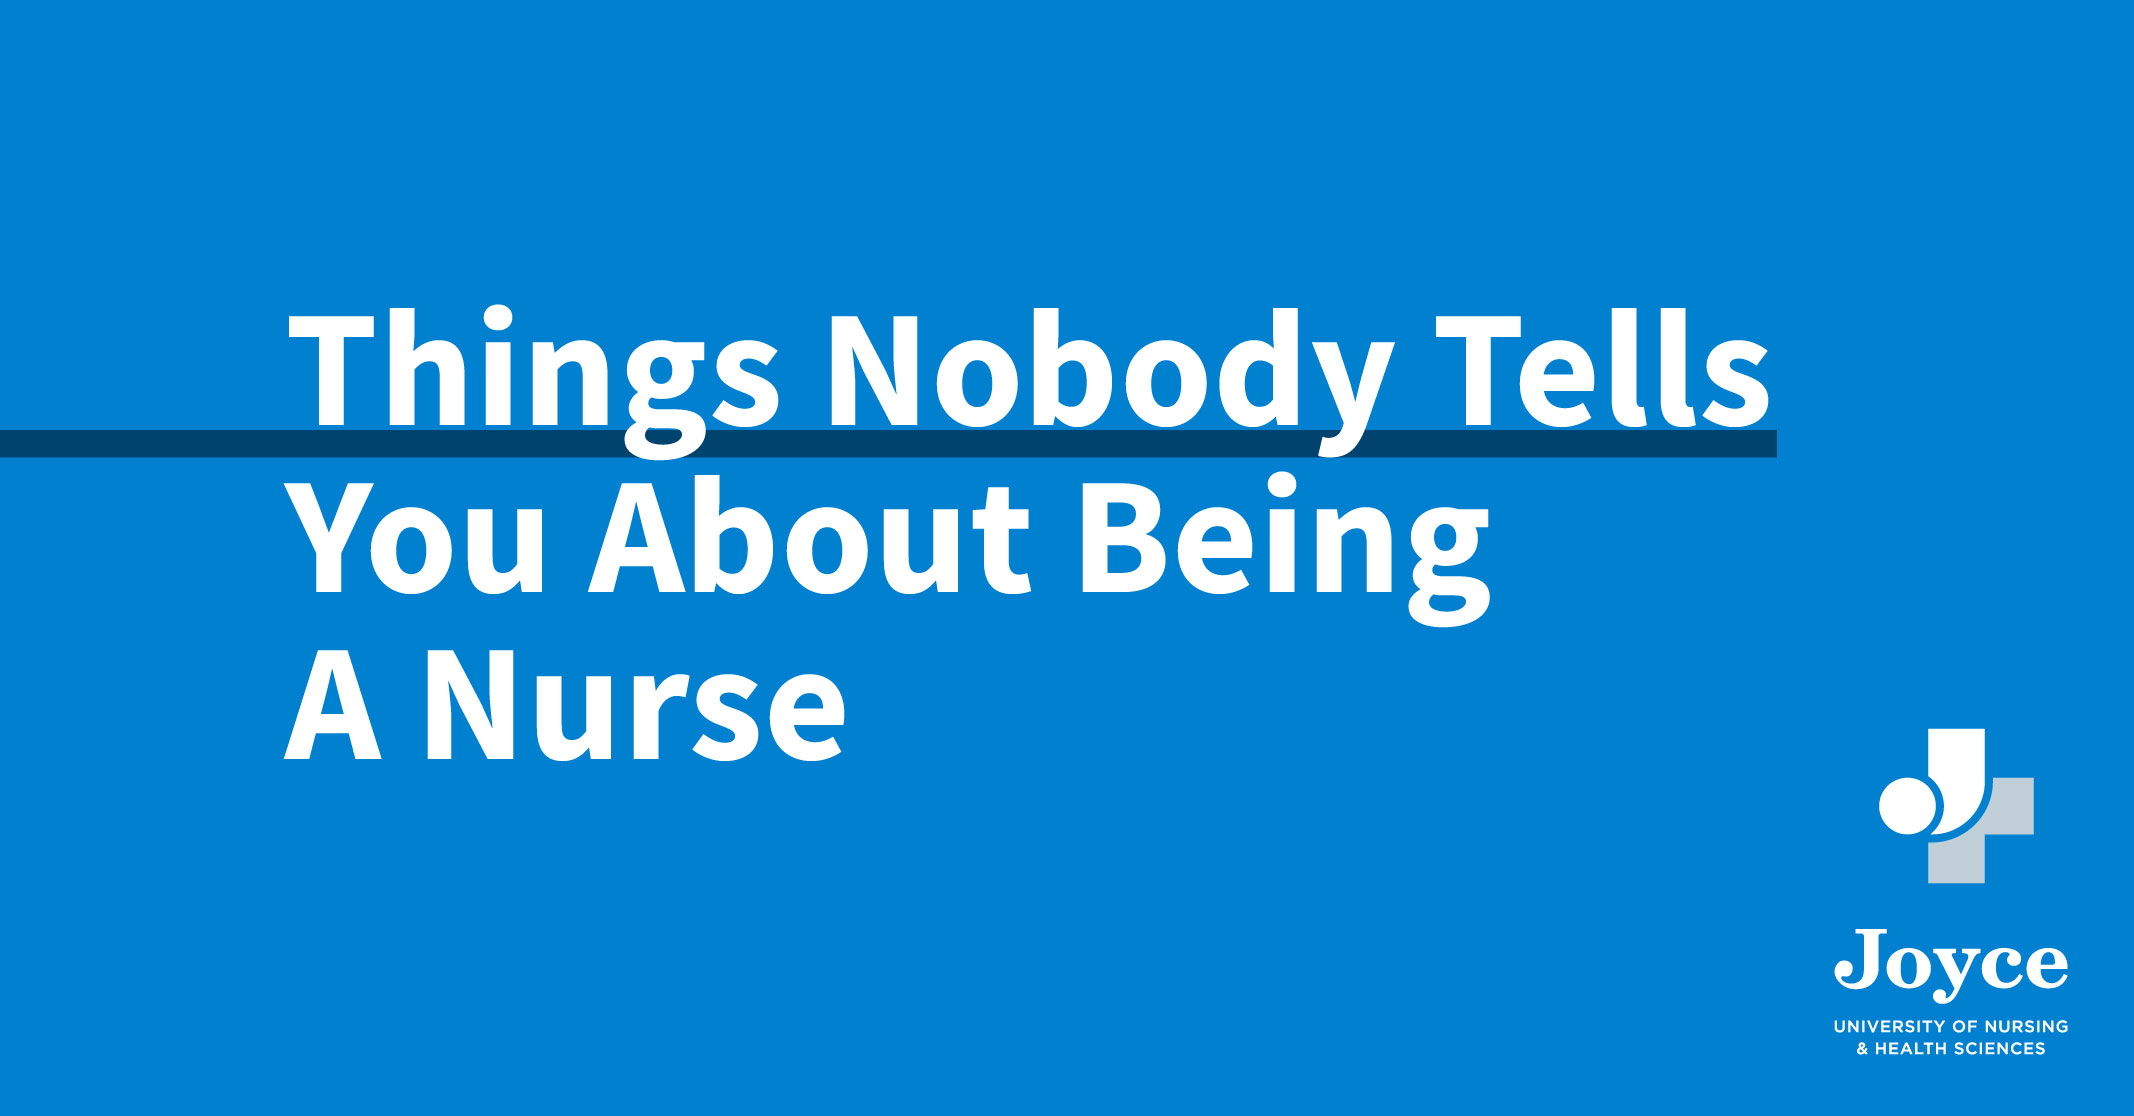 Things Nobody Tells You About Being a Nurse